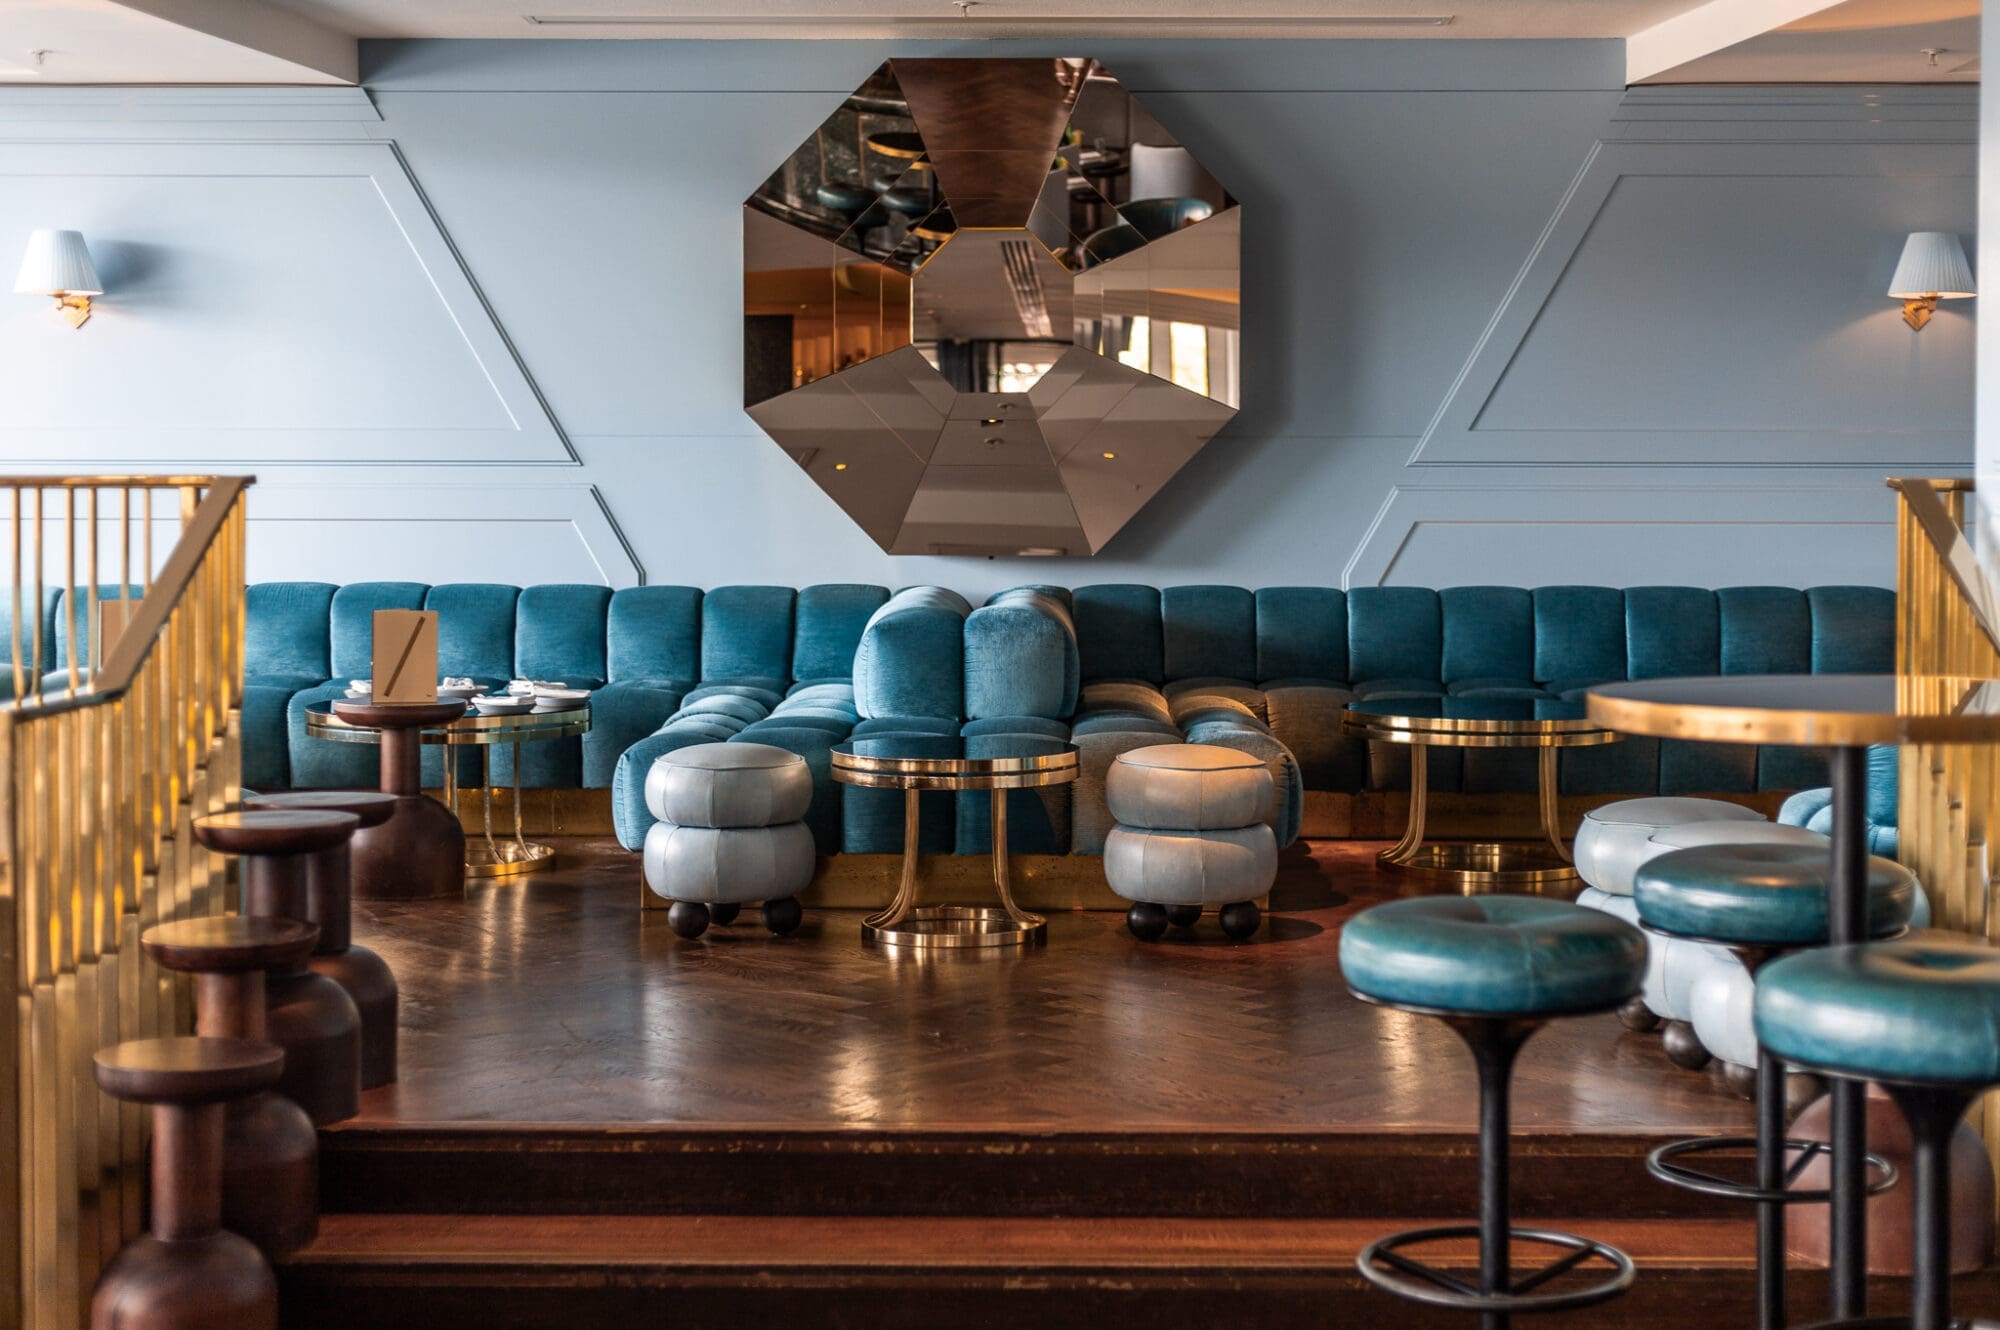 Plush blue sofa and chairs around tables against a blue wall and geometric mirror at Lyaness Cocktail Bar in London